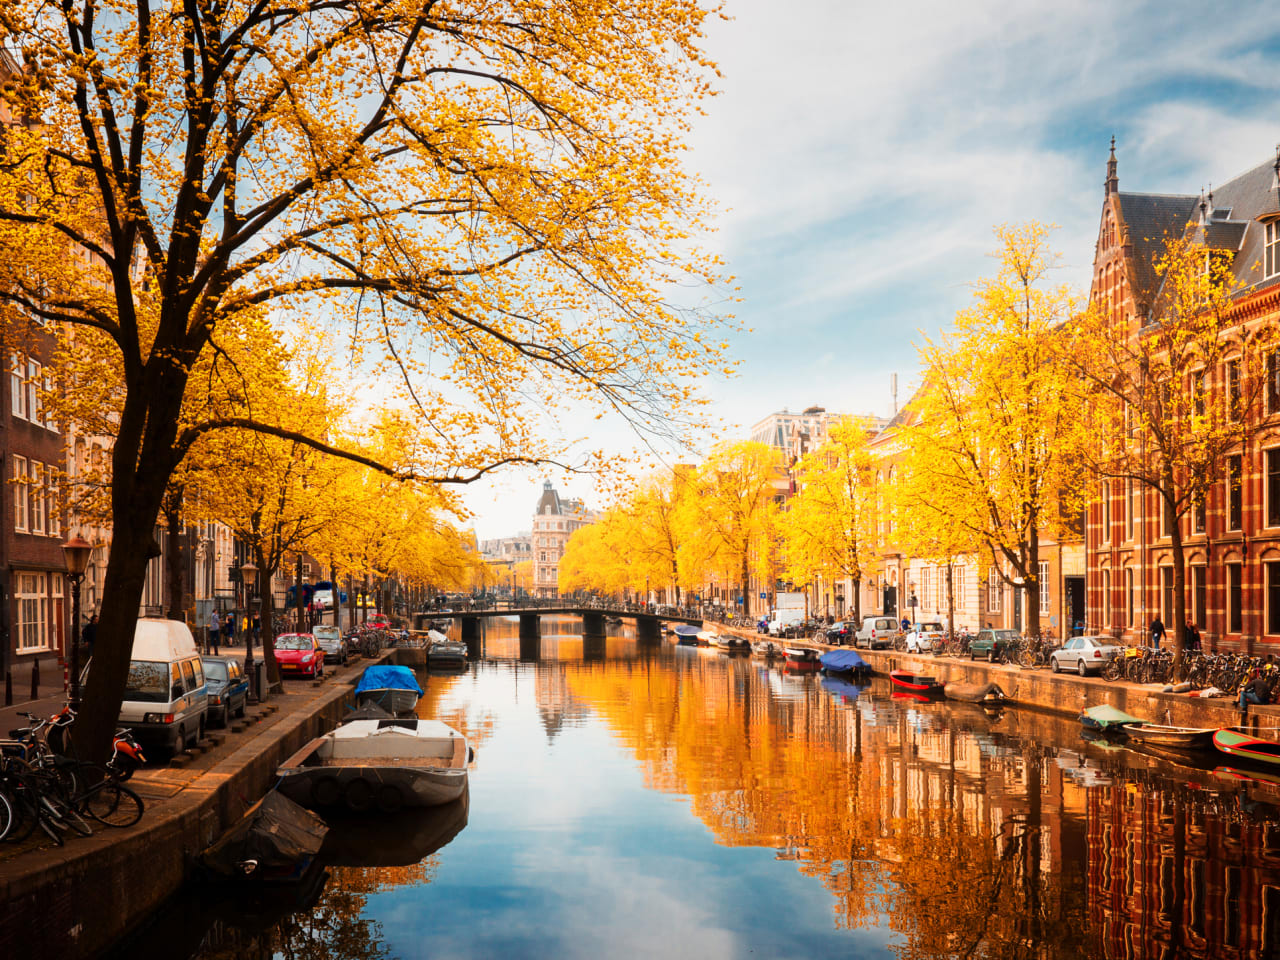 Amsterdamer Kanalring ©neirfy/iStock / Getty Images Plus via Getty Images